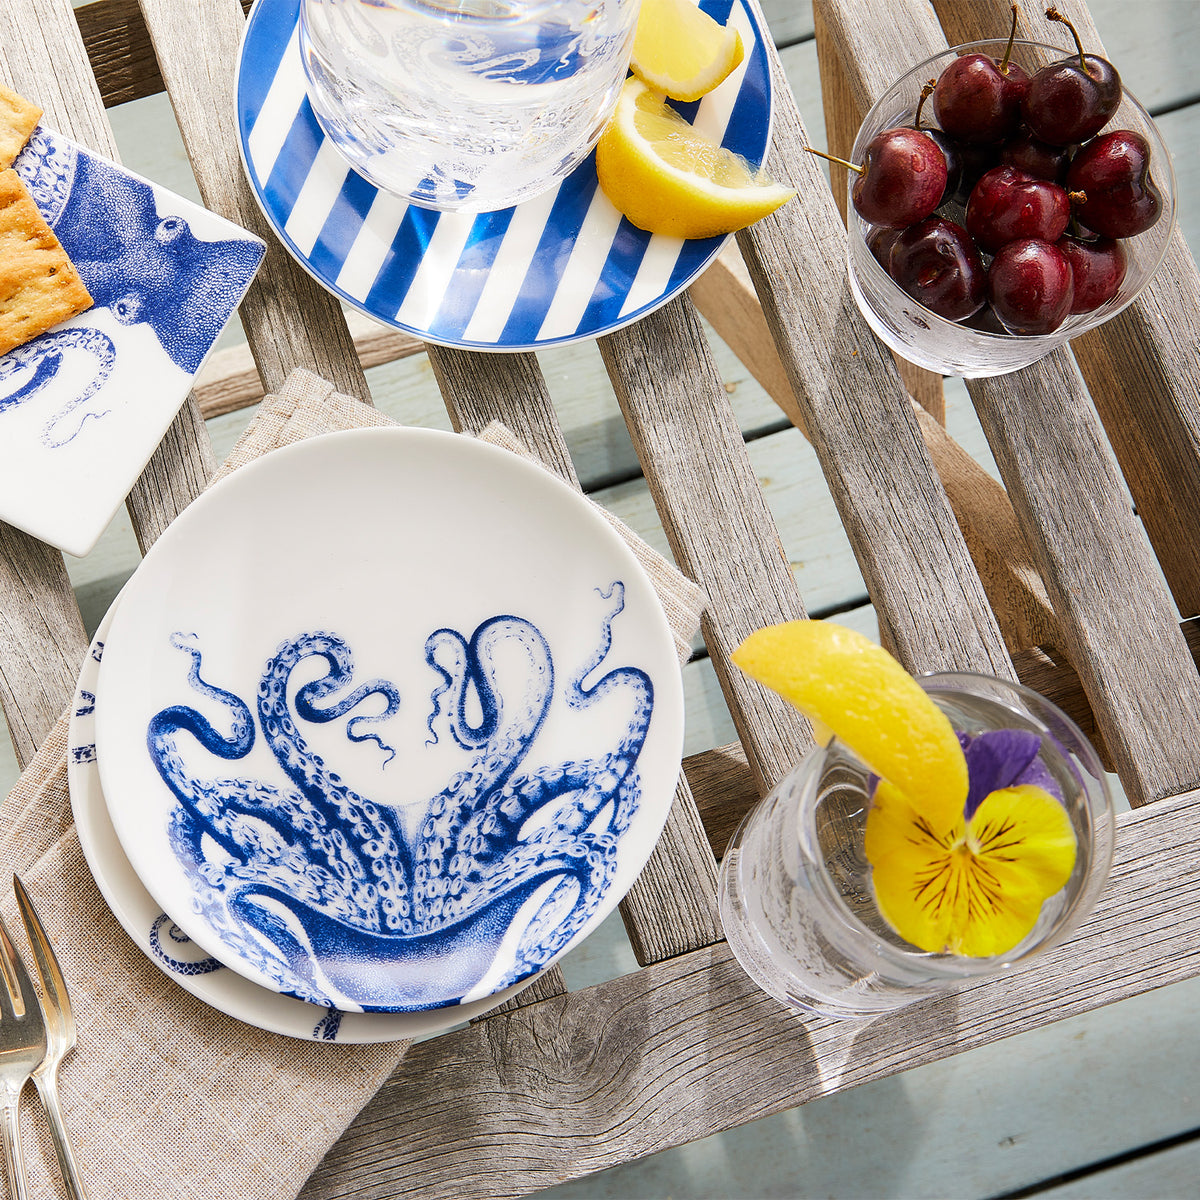 A table with a wooden surface featuring Beach Towel Stripe Small Plates by Caskata Artisanal Home, a bowl of cherries, a glass with a lemon slice and purple flower, and a plate with lemon wedges beside a glass of water.